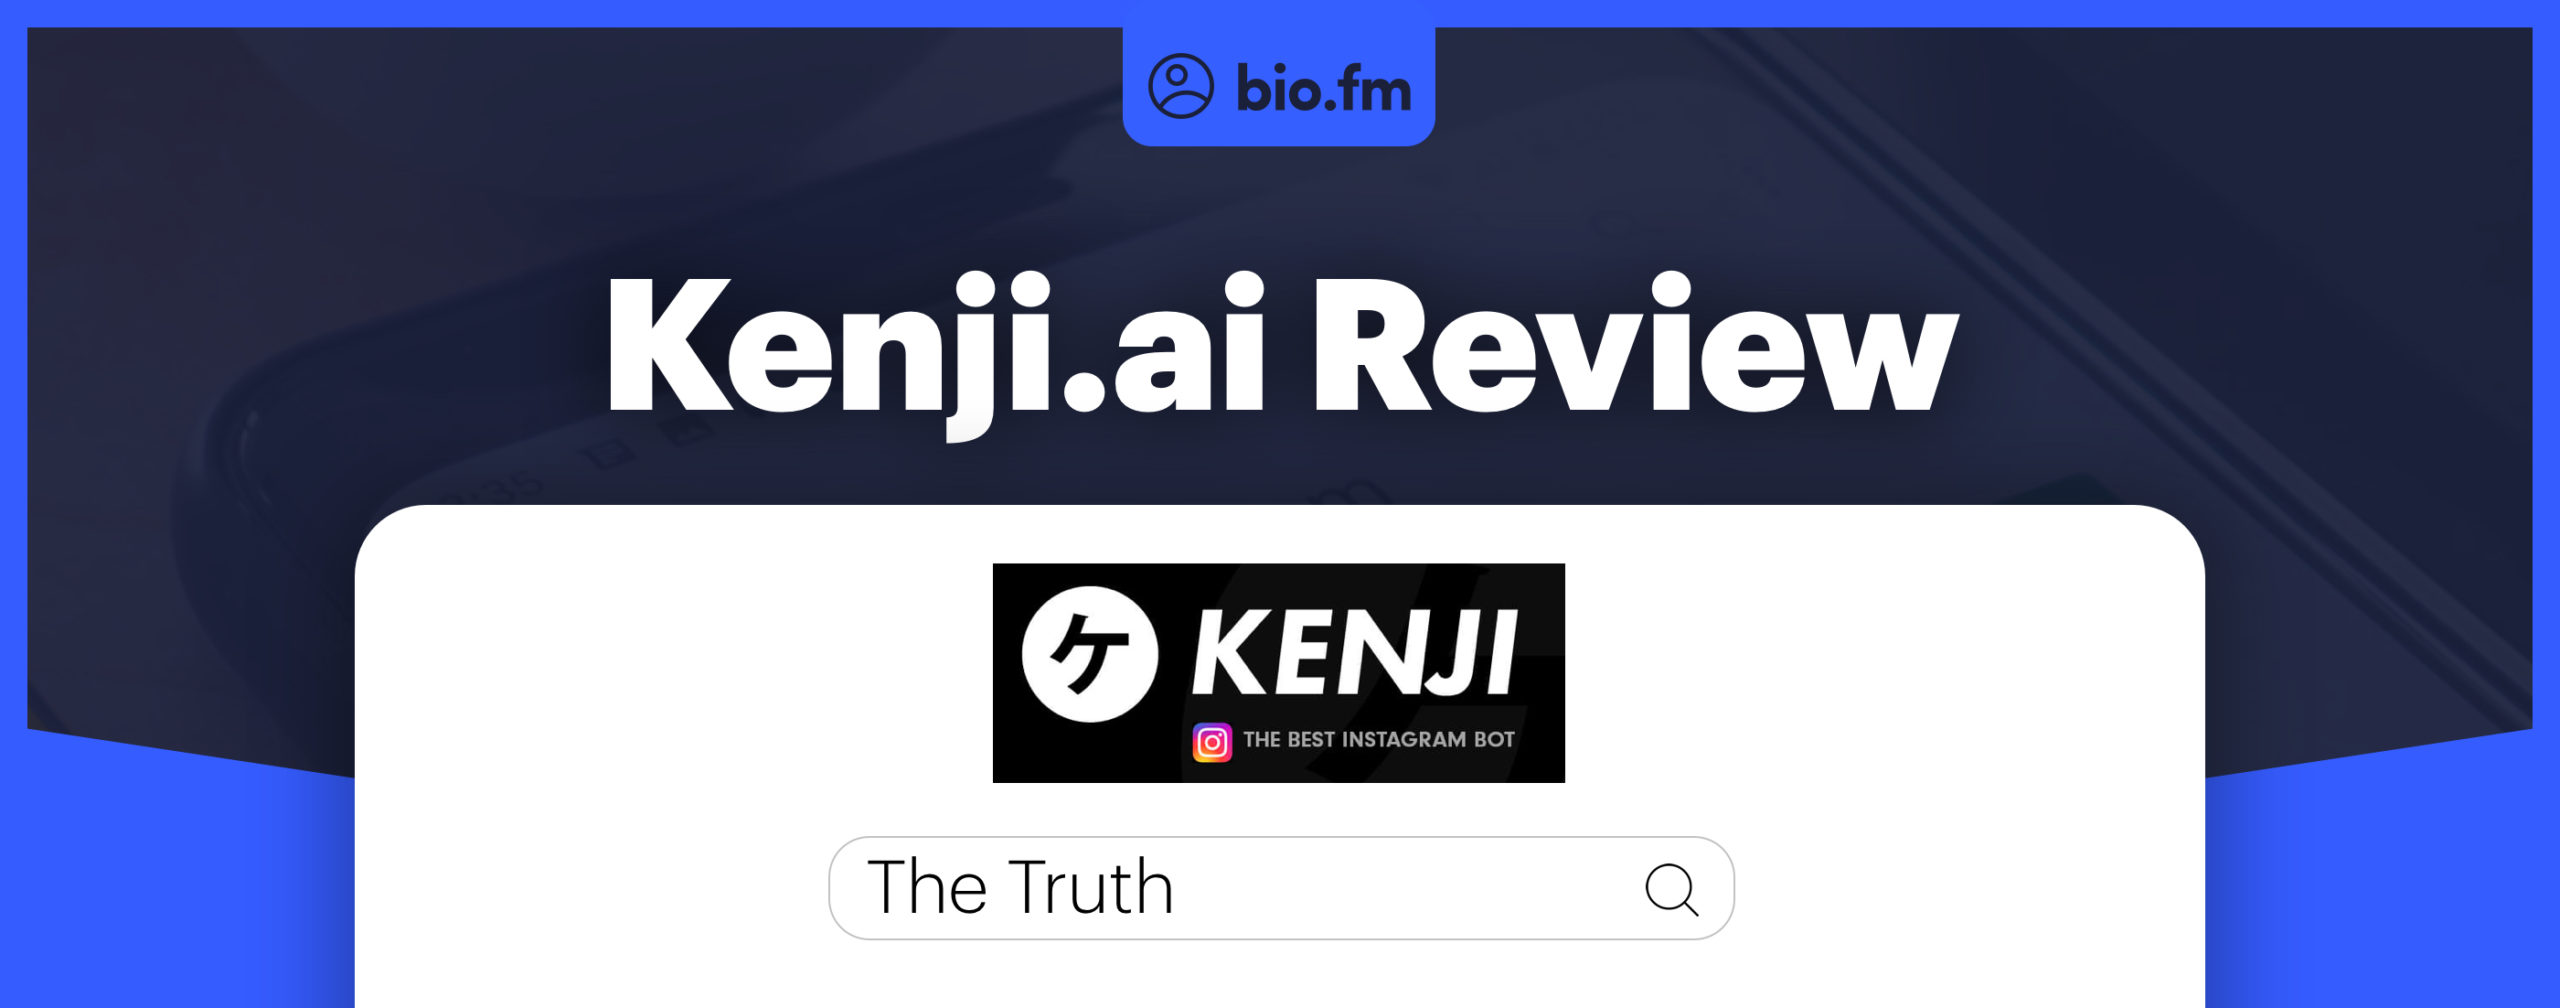 kenji review featured image